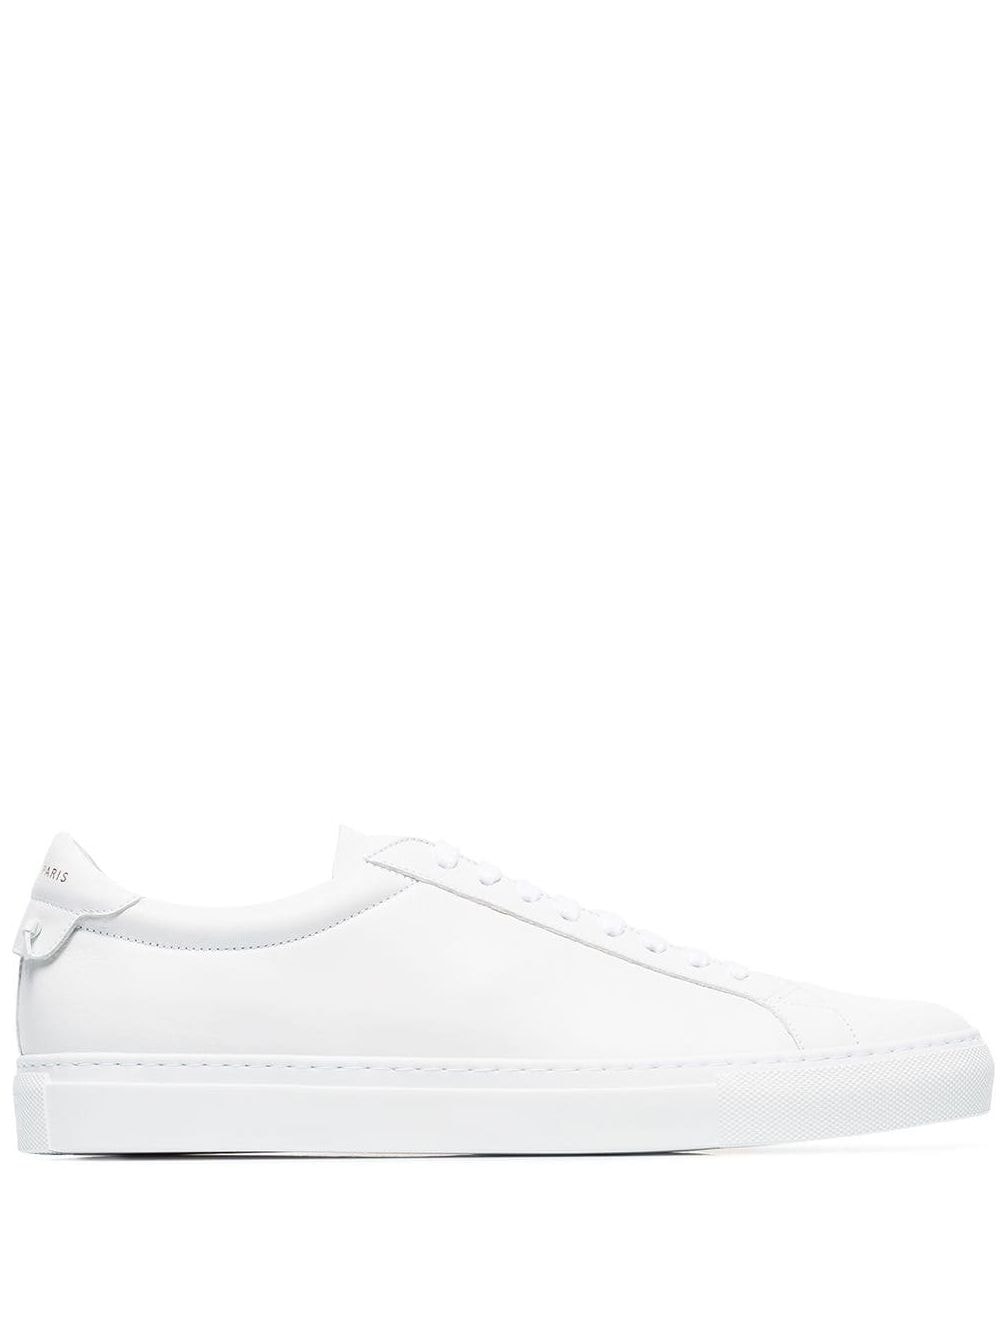 Urban Street Leather Sneakers мъжки обувки Givenchy 840784282_39